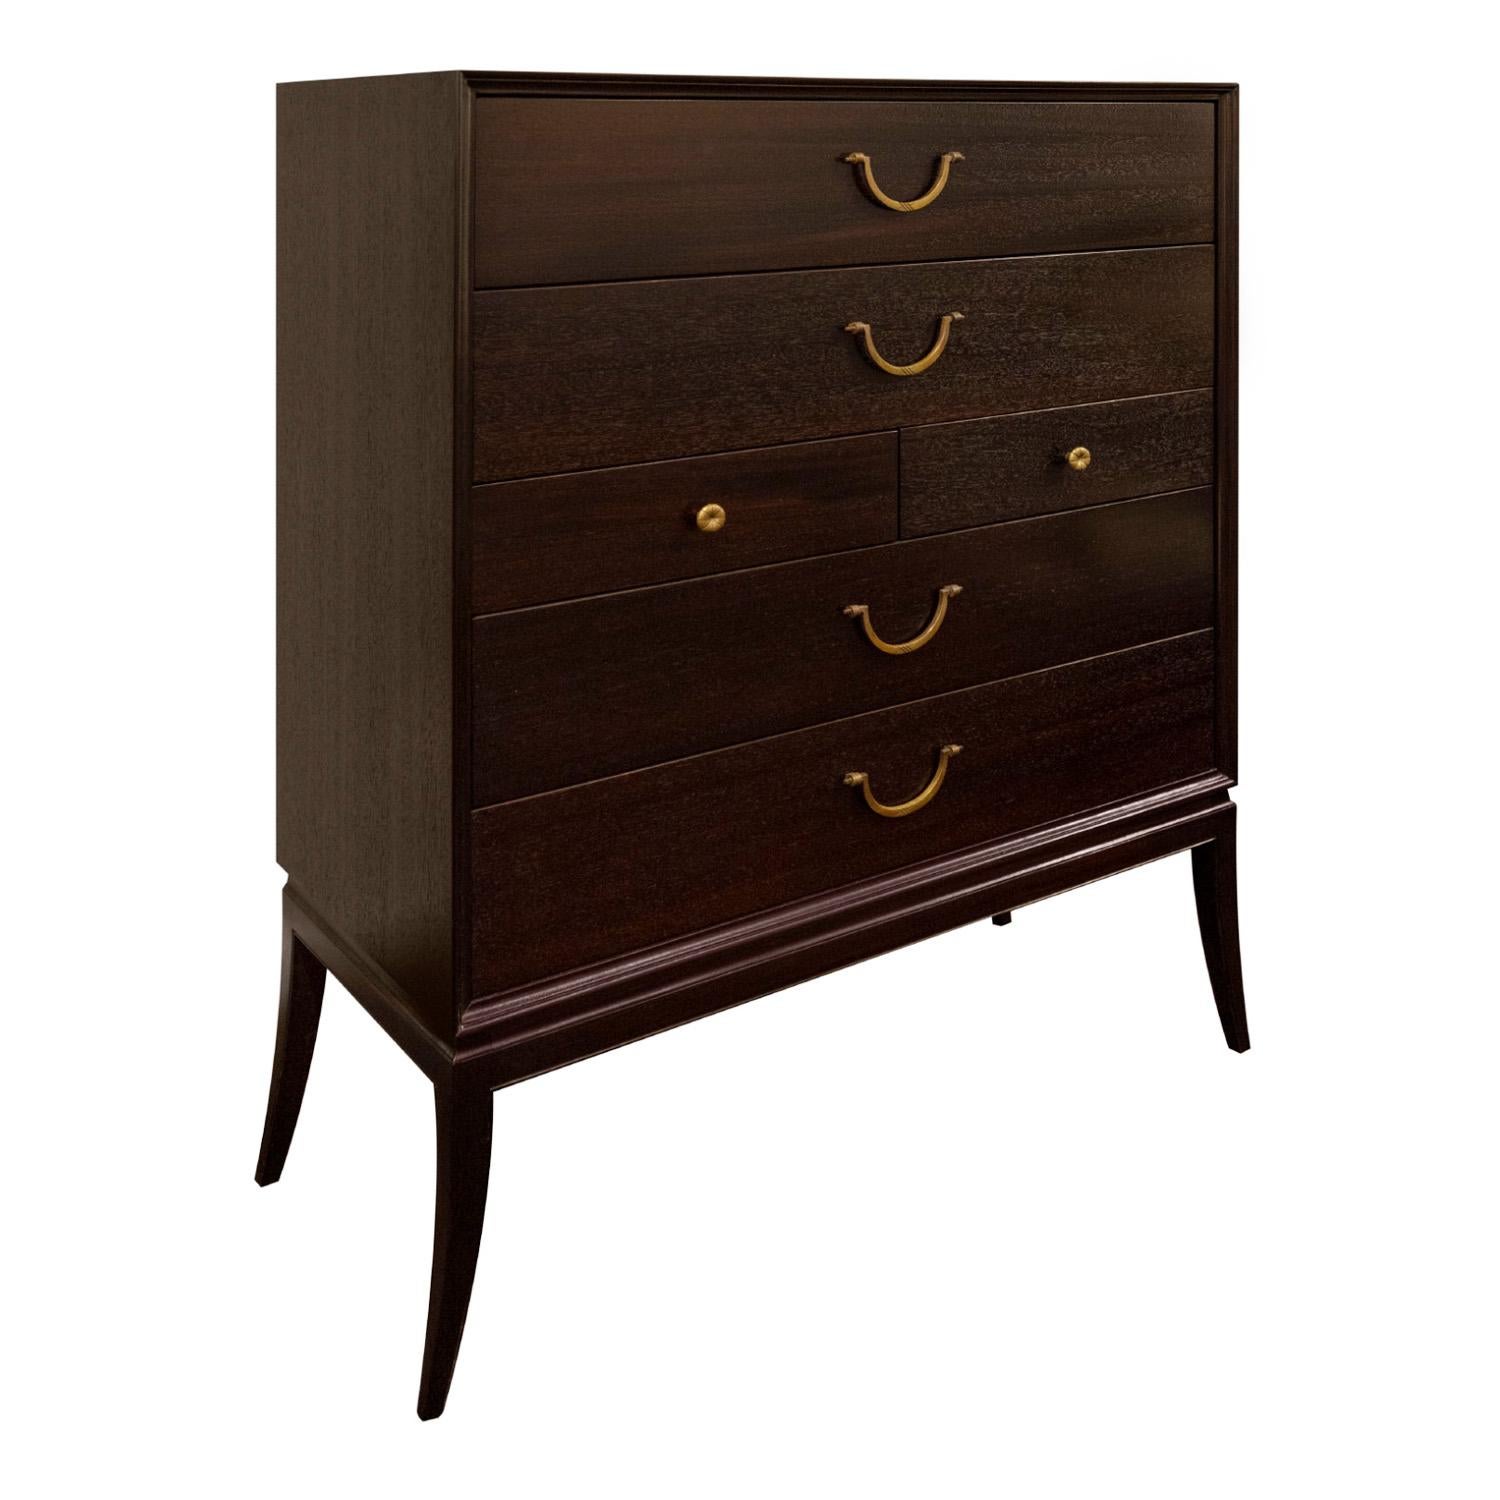 Mid-Century Modern Tommi Parzinger Elegant Chest of Drawers with Etched Brass Pulls 1950s (Signed) For Sale